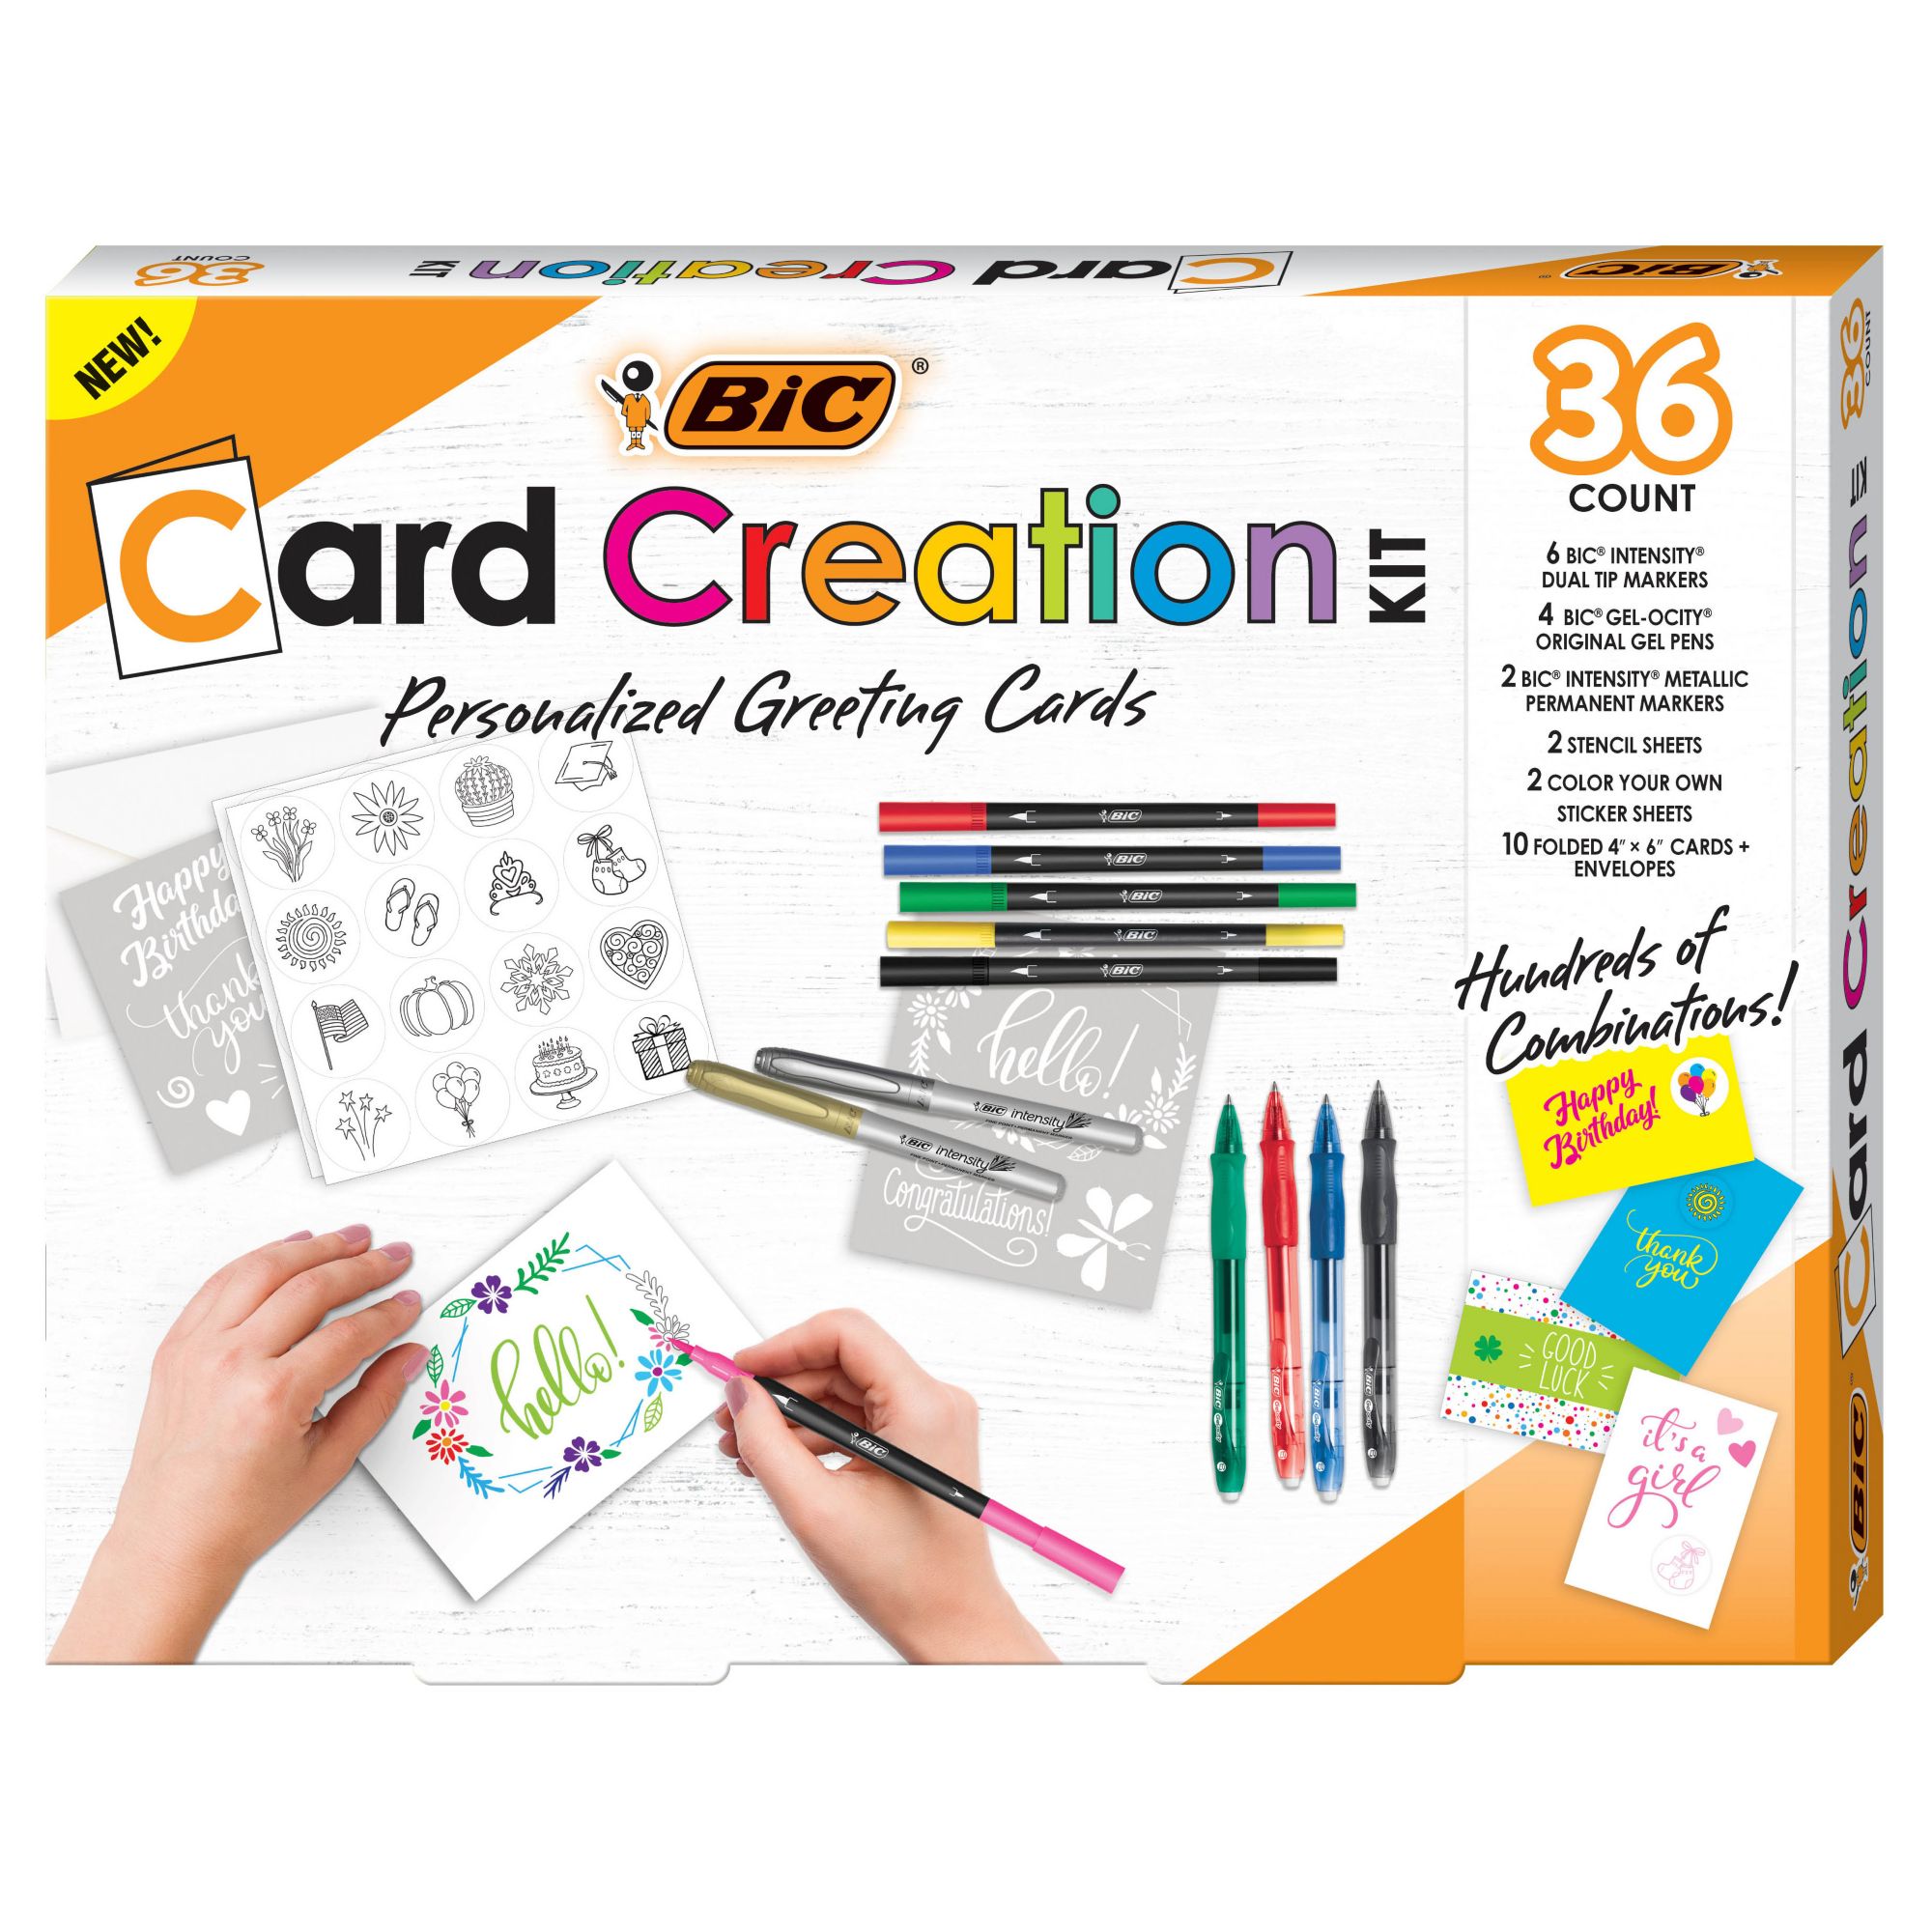 BIC Card Creation Kit Personalized Greeting Cards